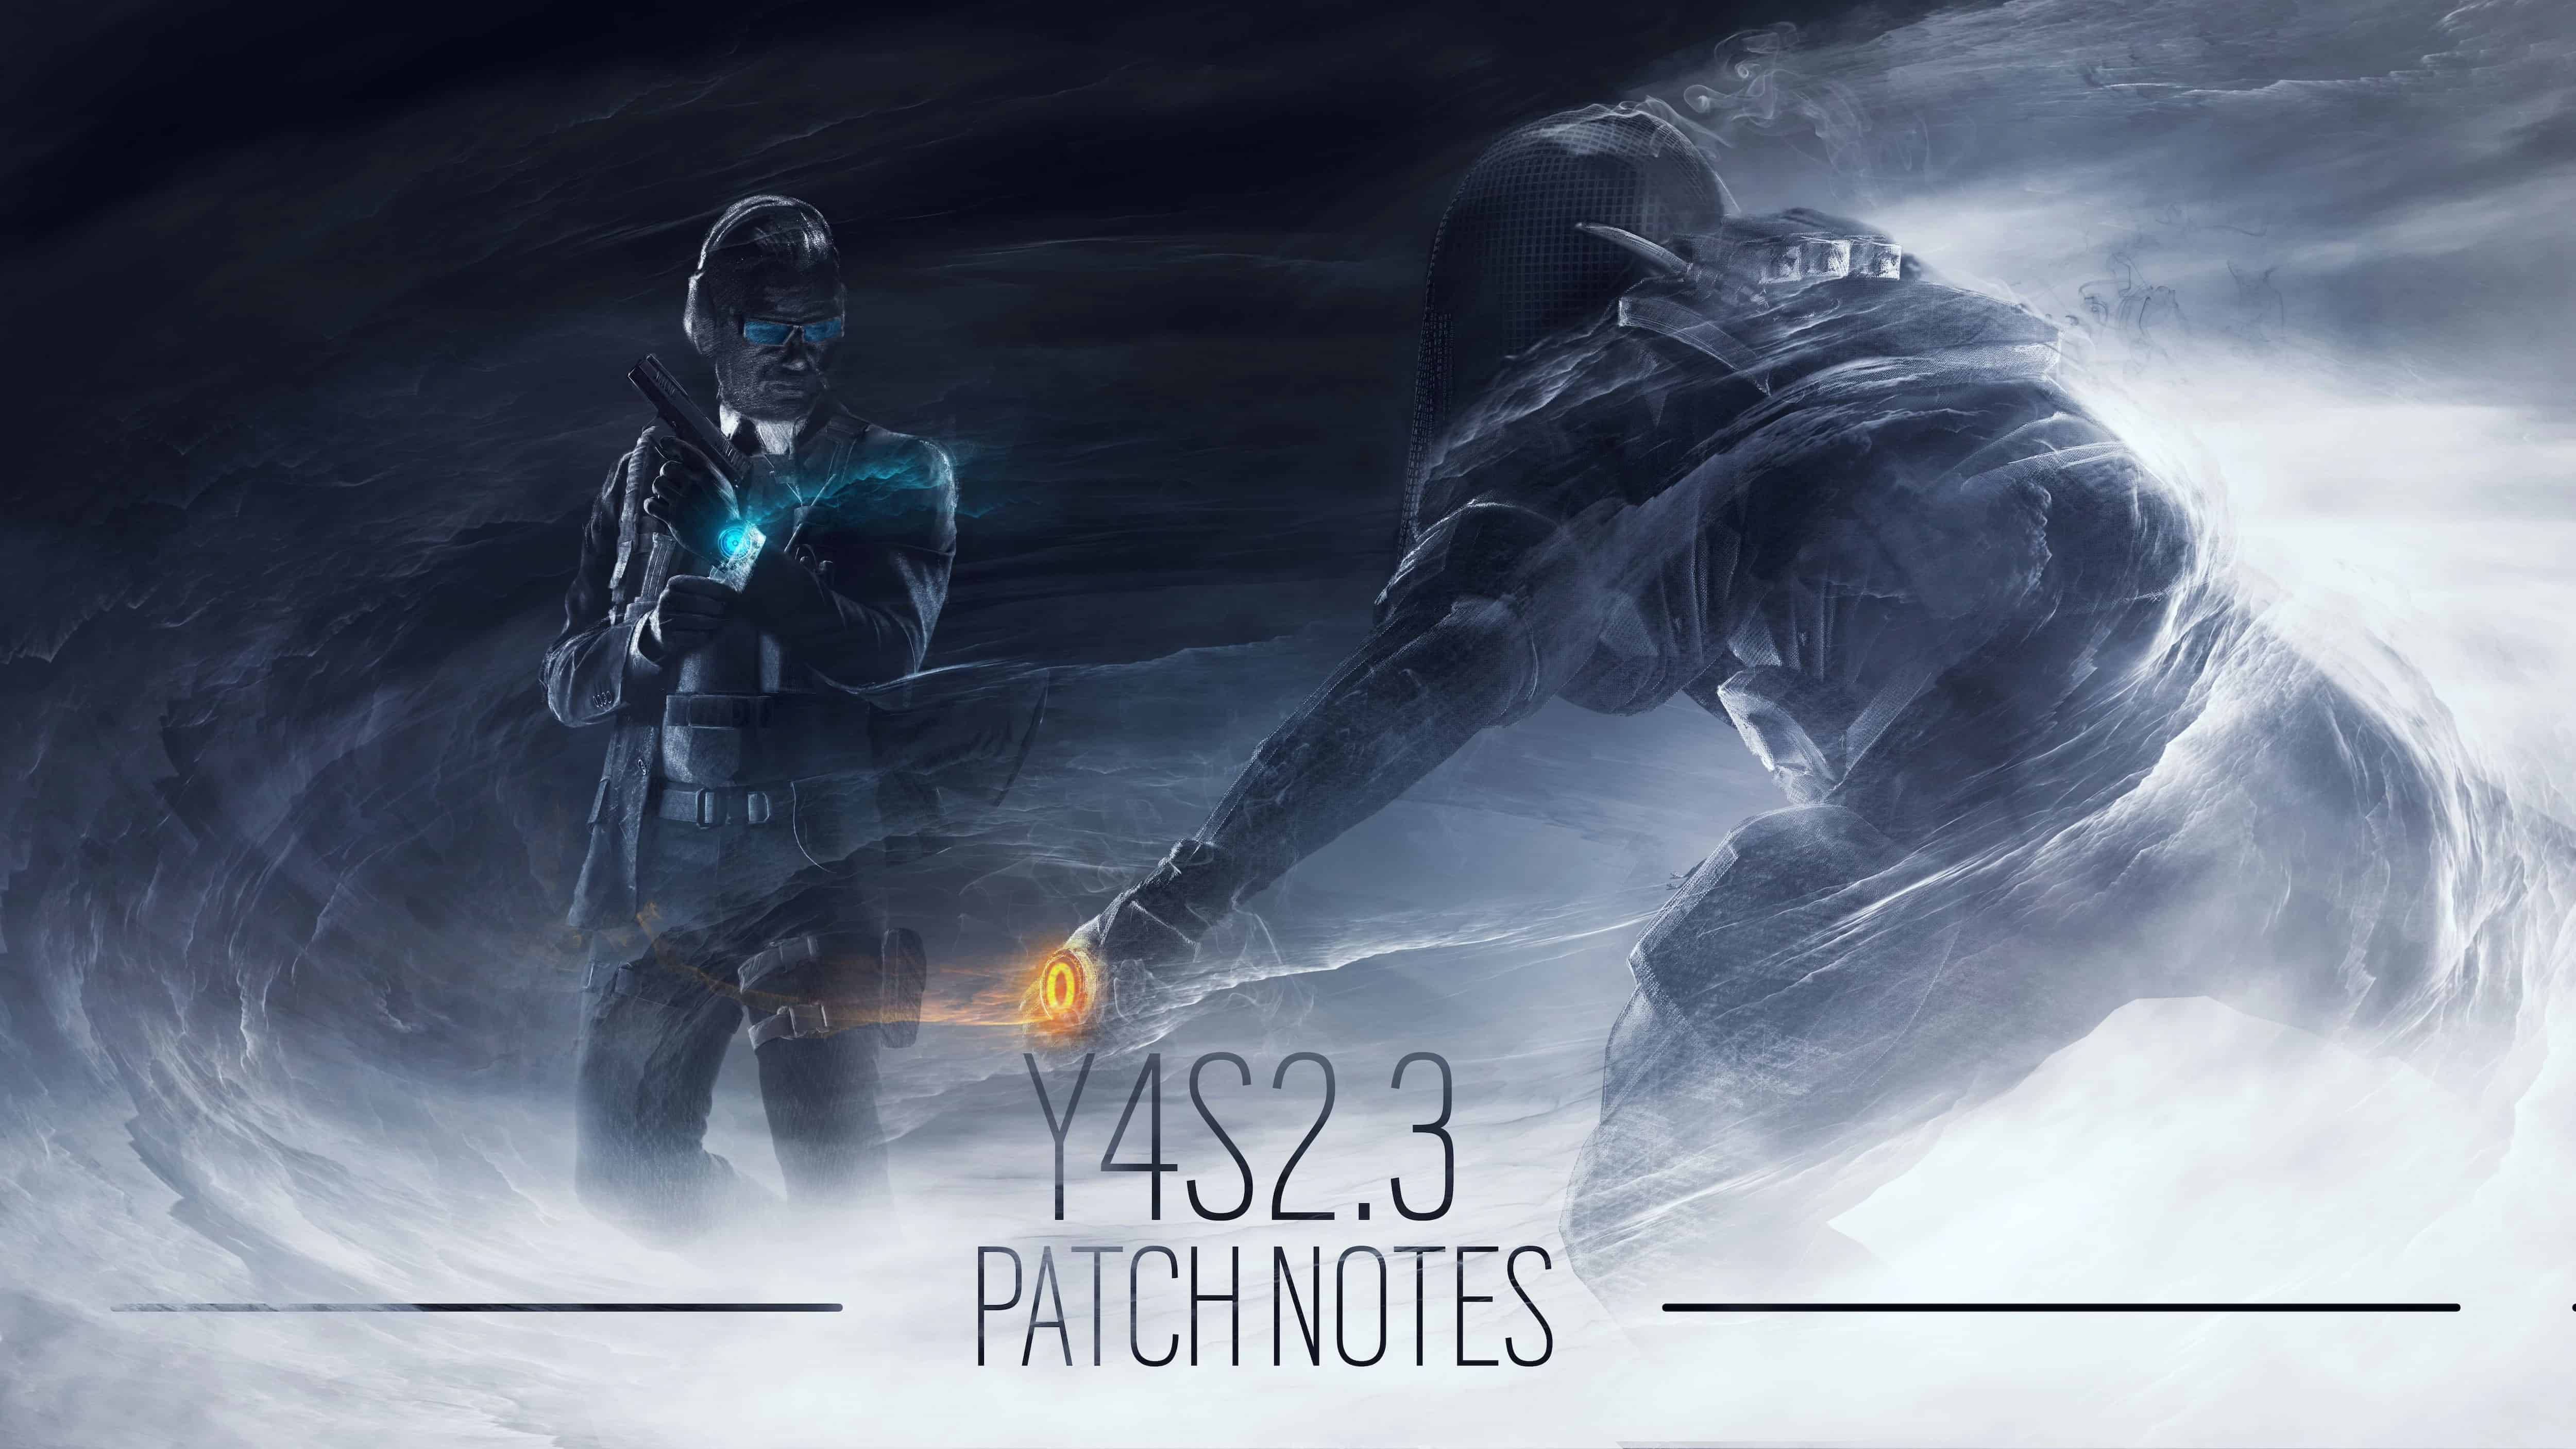 This picture is theofficial picture for the R6 - Patch Notes from 27.07.2019